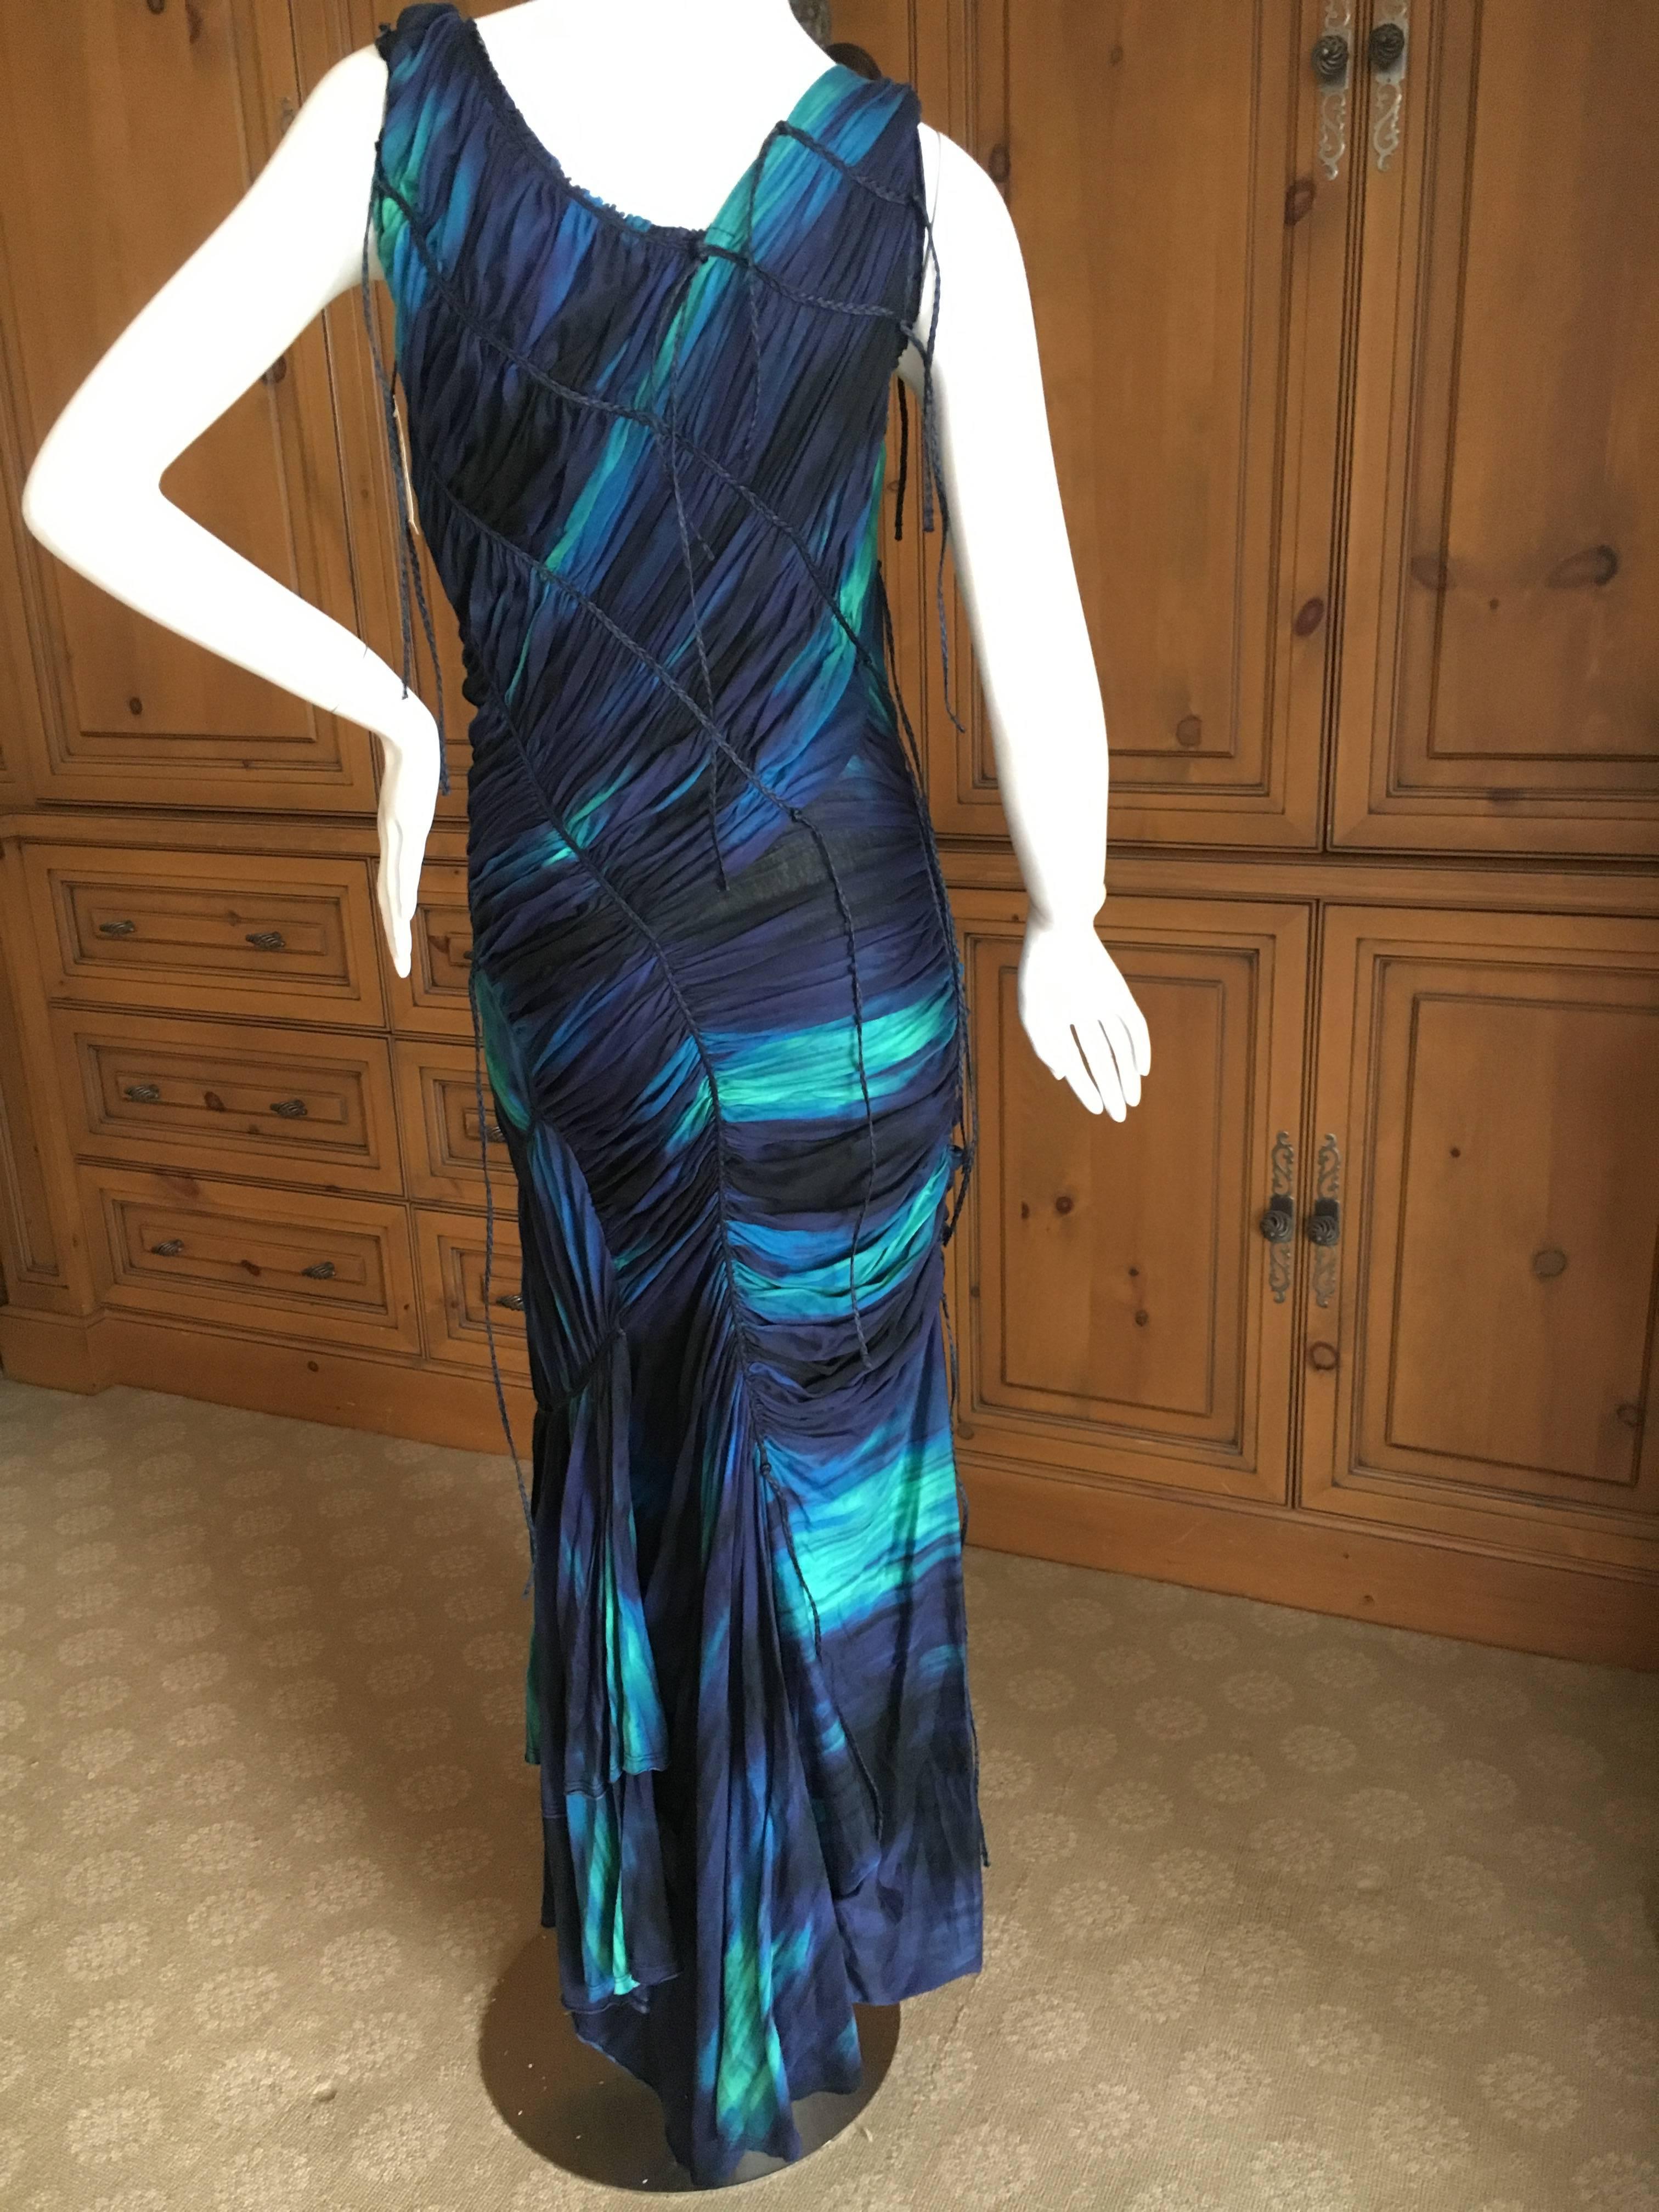 Women's Issey Miyake Bergdorf Goodman 1990's Tie Dye Ruched Dress New with Tags